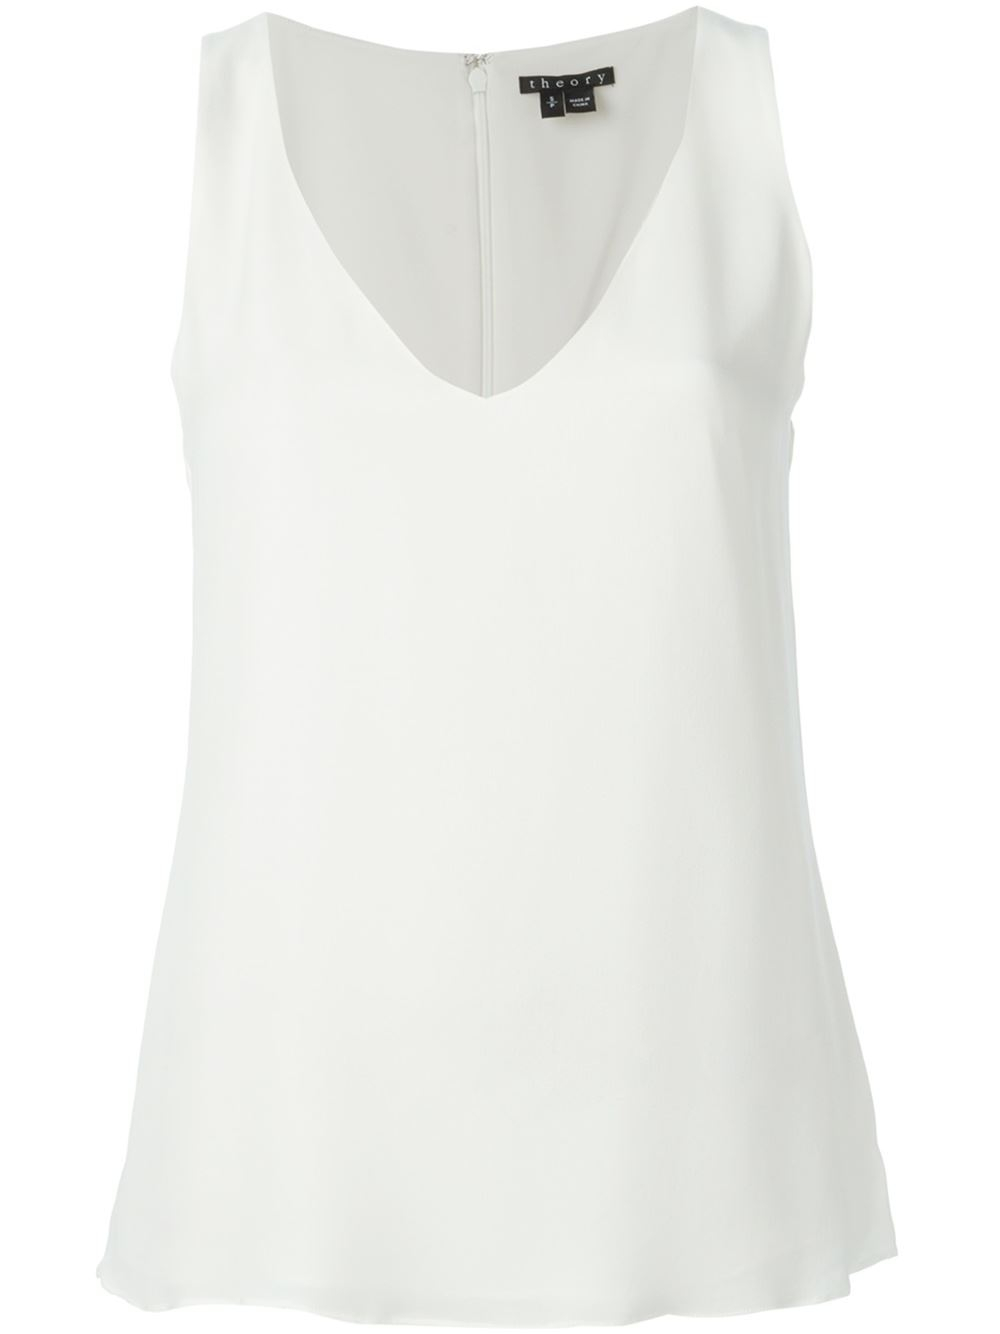 Lyst - Theory V-Neck Tank Top in White